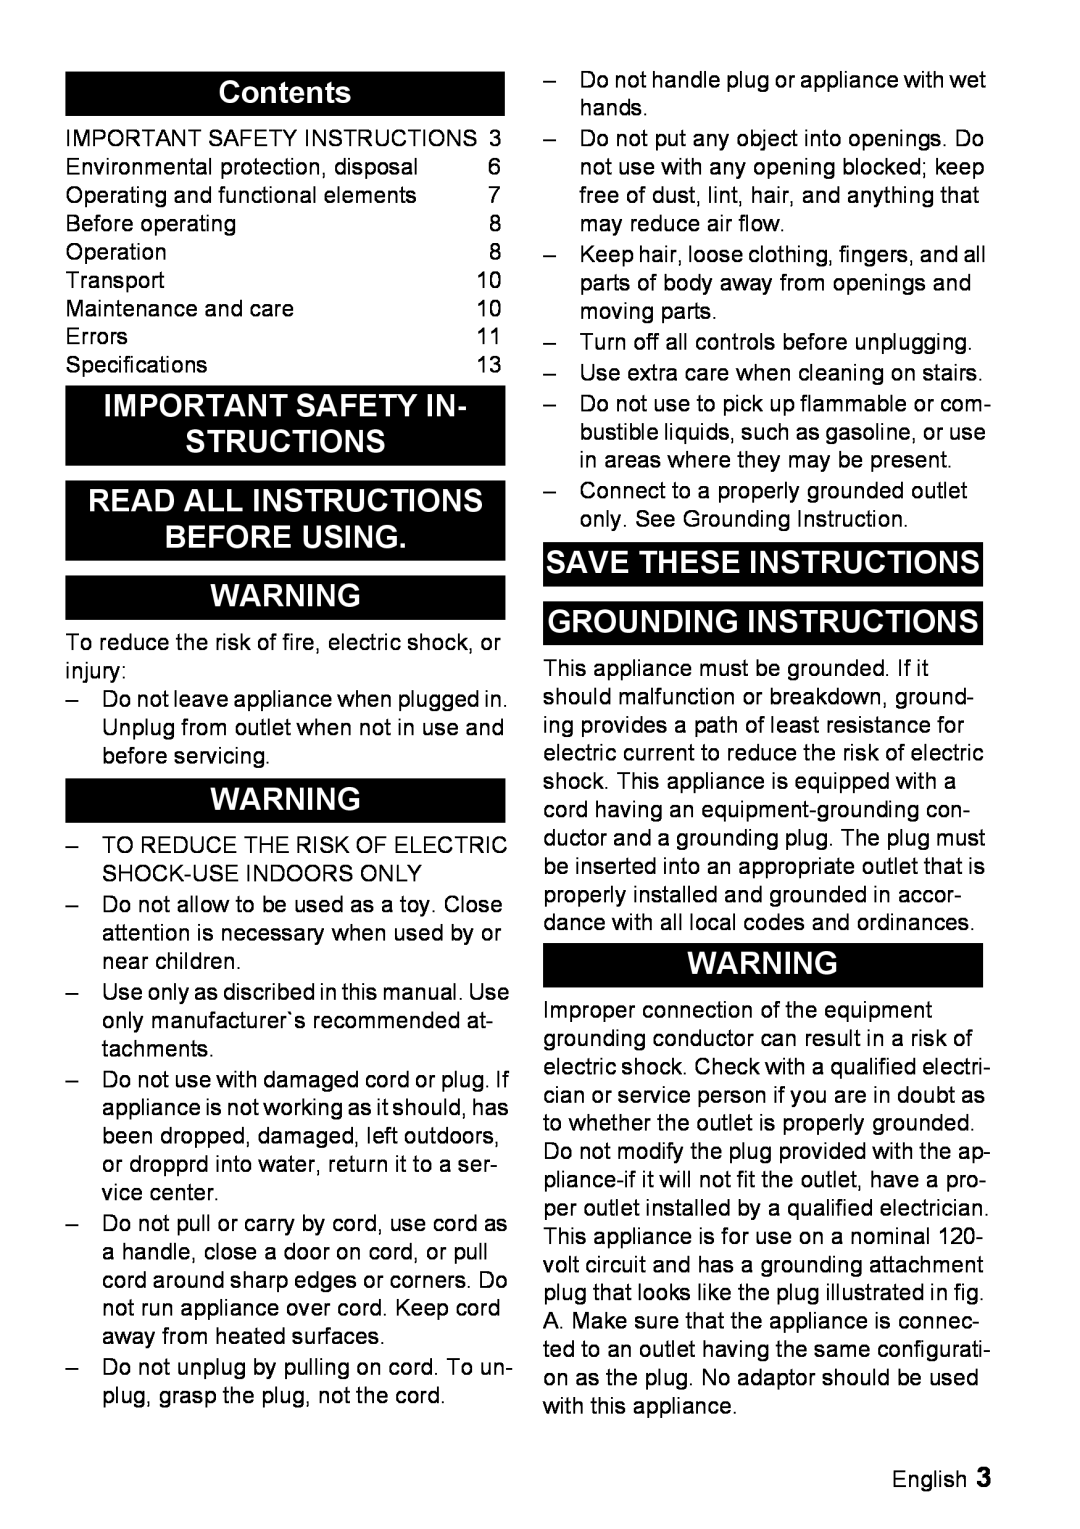 Windsor 16 manual Contents, Important Safety In Structions, Read All Instructions Before Using 